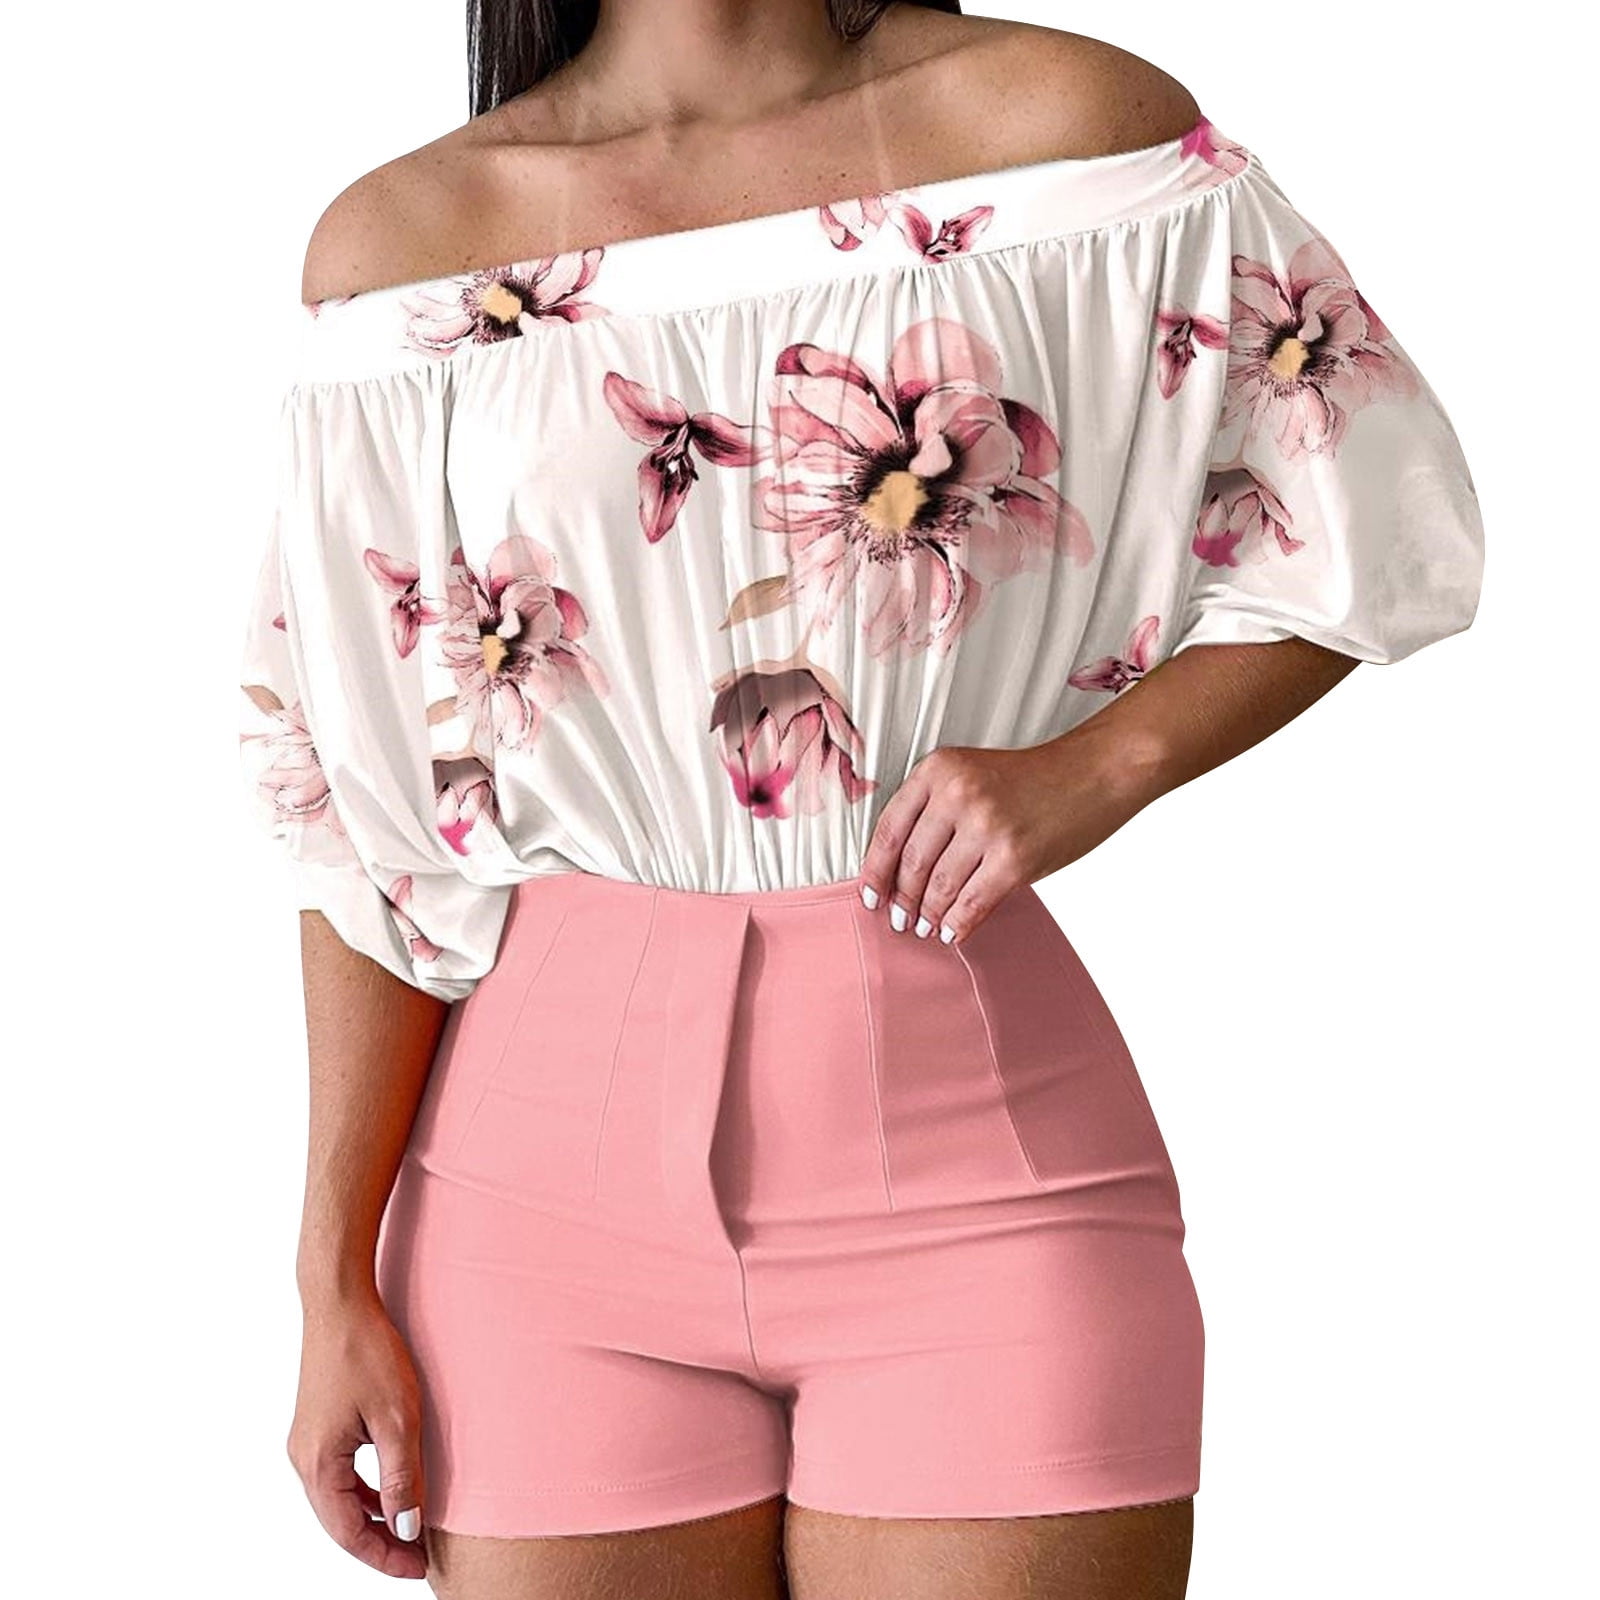  Outfit Sets Tops and High Waist Shorts Summer Women 2 Piece  Outfits Suitable for Friends Gathering Wear : Clothing, Shoes & Jewelry